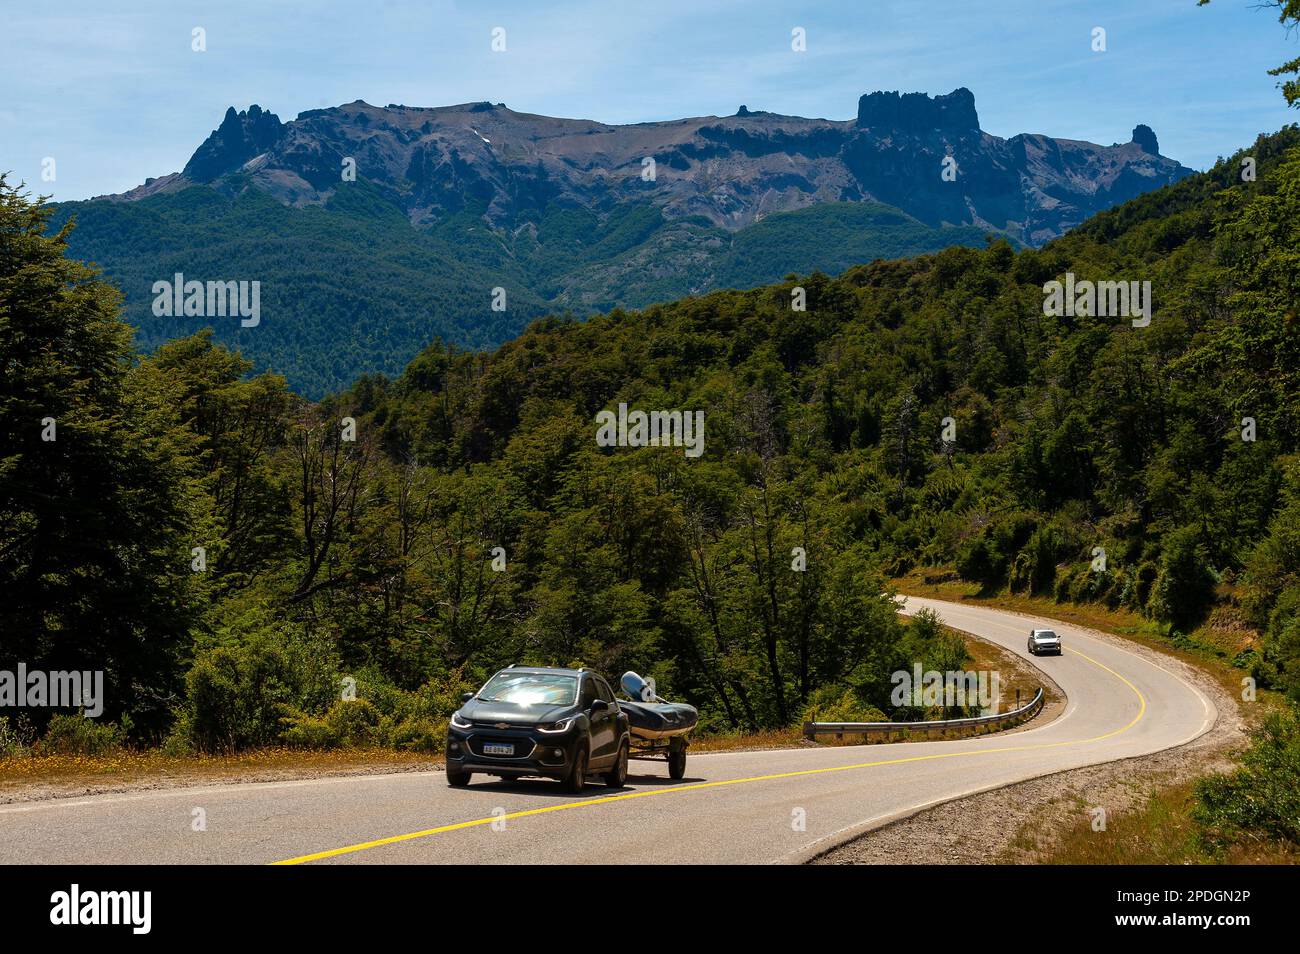 Tourists driving on the beautiful scenery of snowy mountains on Ruta 40, Ruta de Los Siete Lagos or Route of Seven Lakes, Neuquén, Argentina Stock Photo